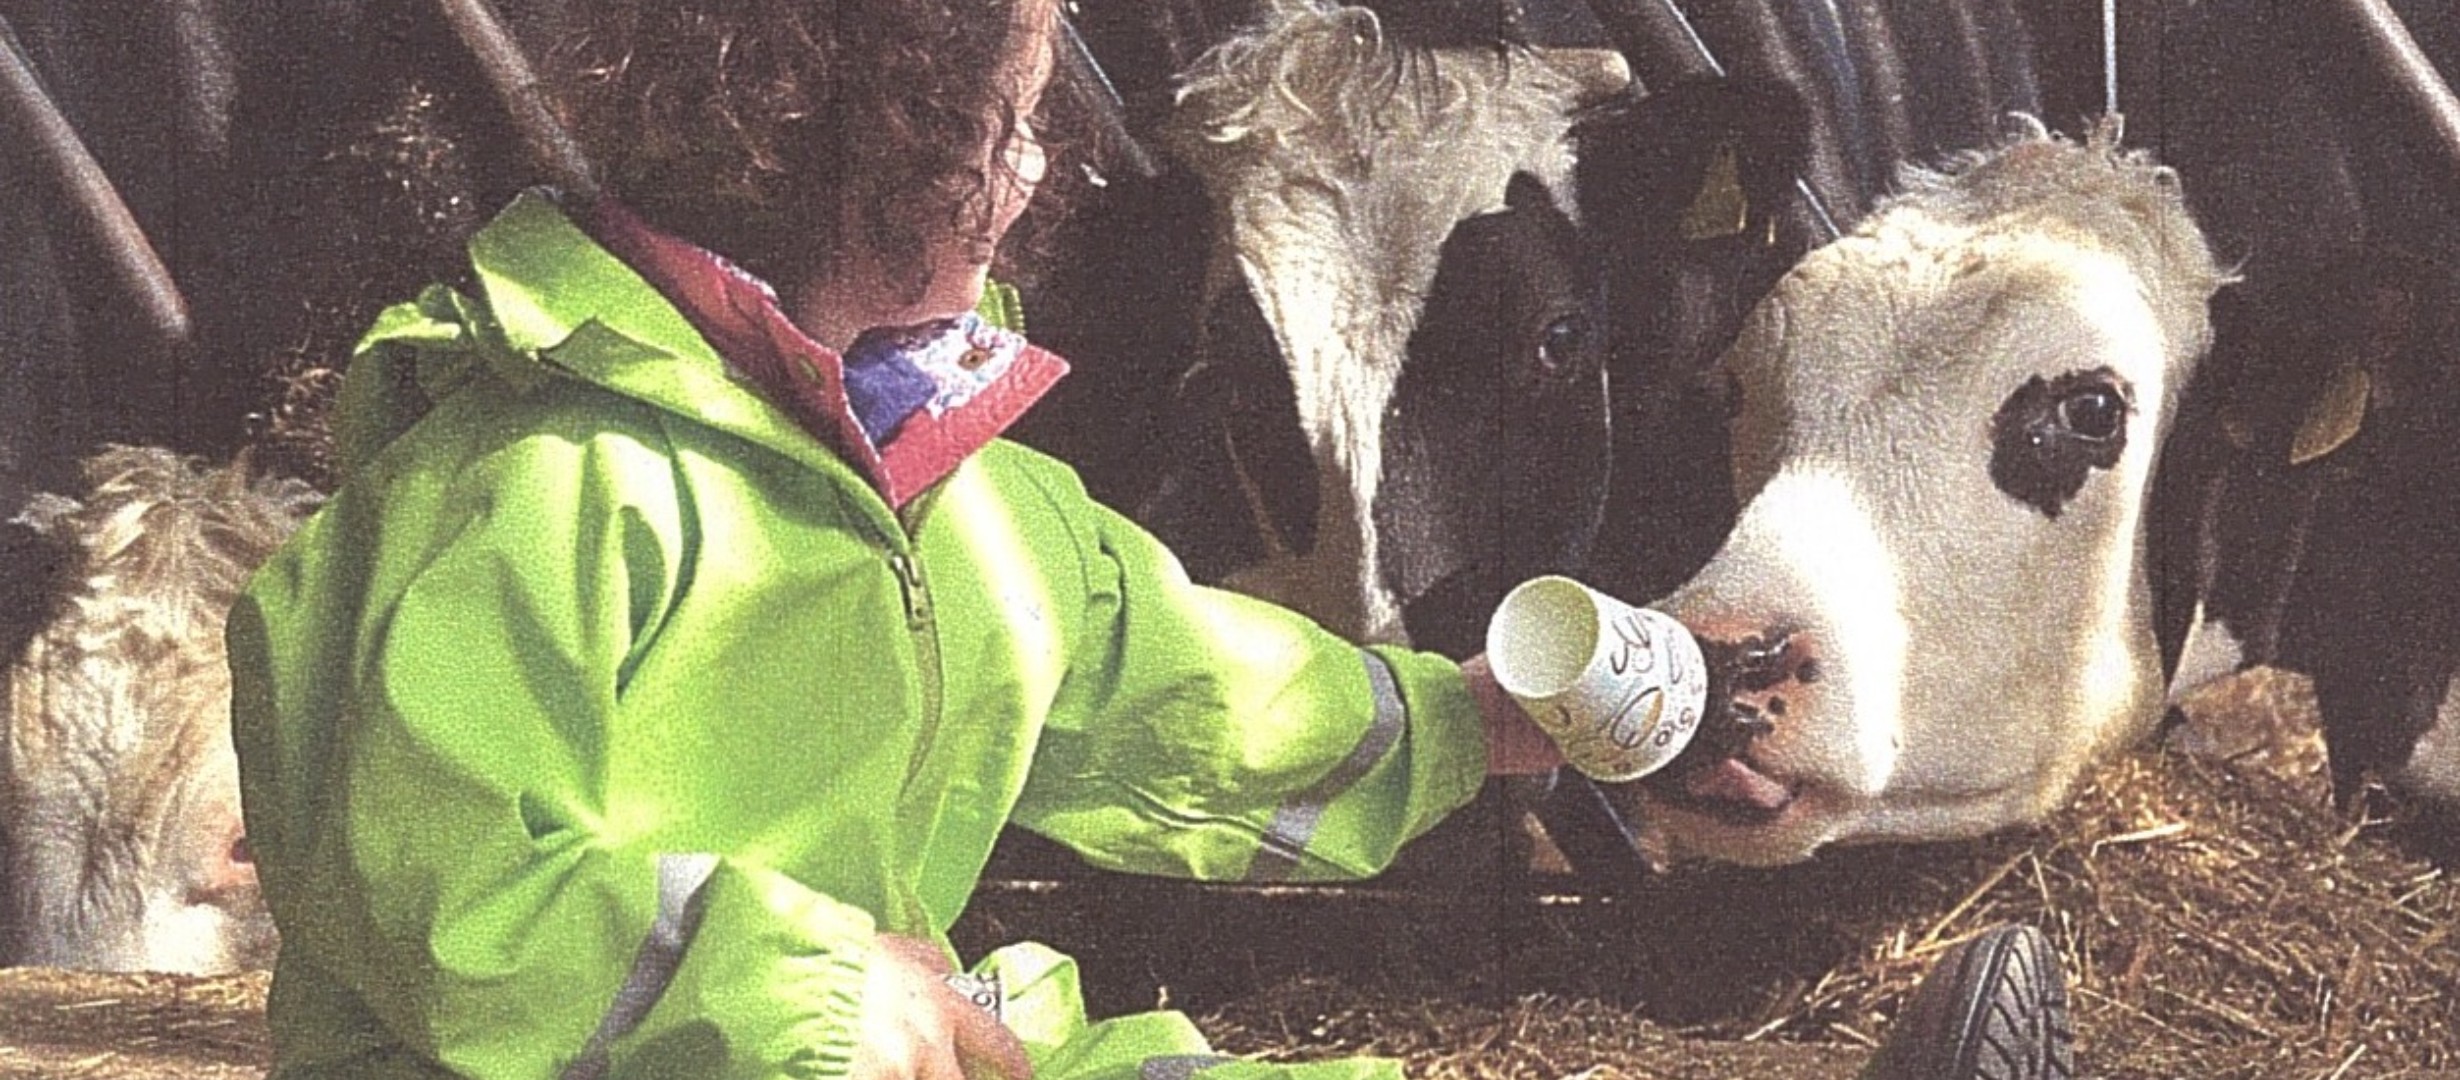 Child sitting on floor feeding a black and white cow s cup of milk